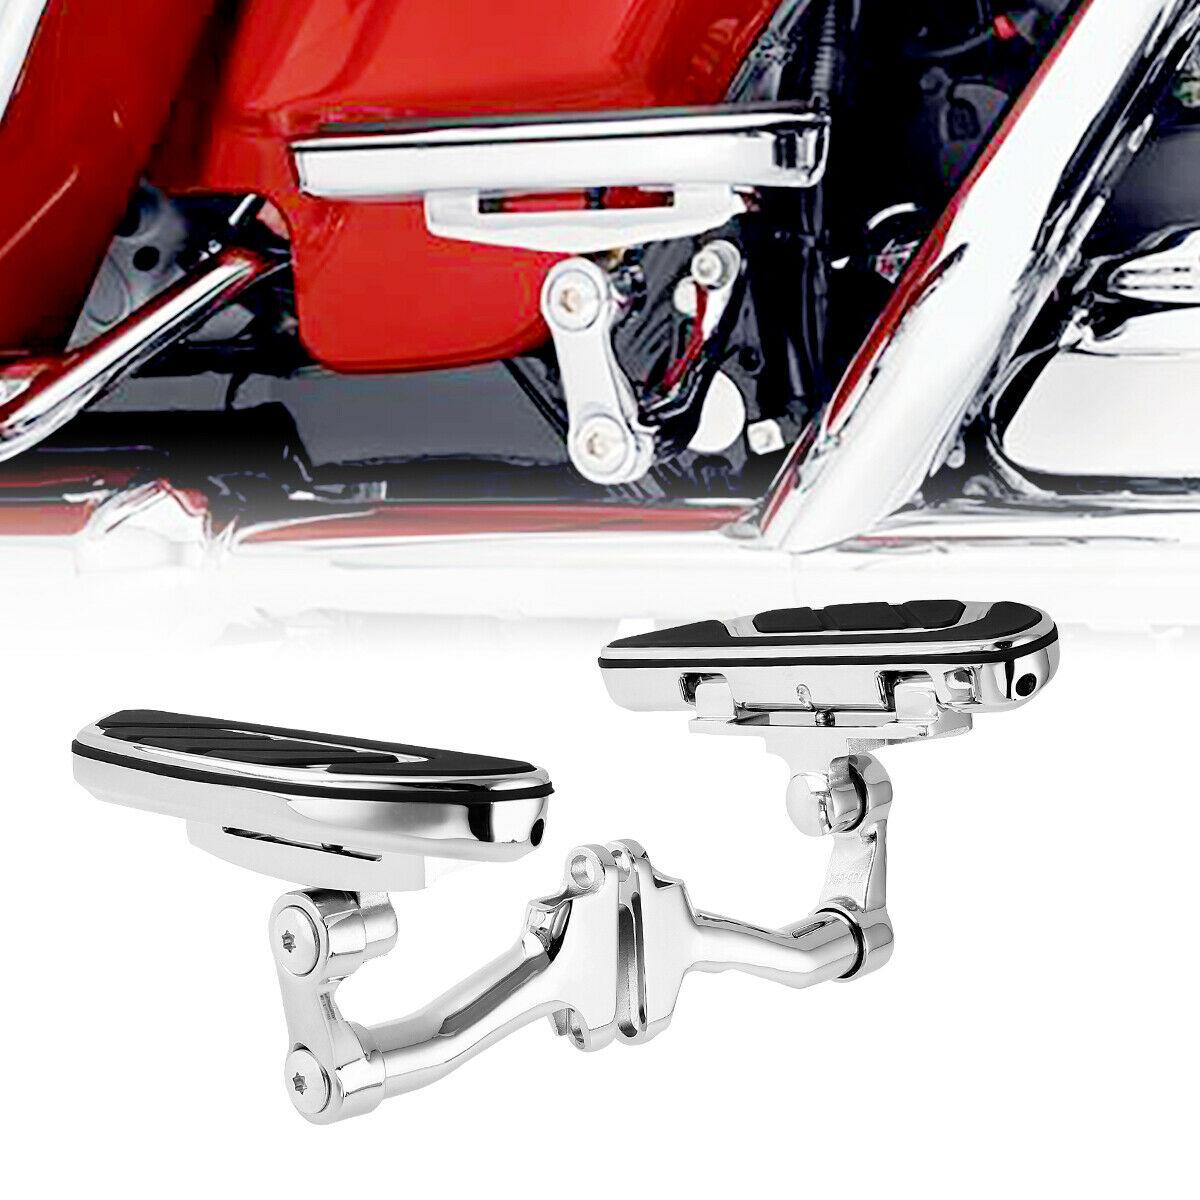 Rear Airflow Floorboard Footboard Bracket Set Fit For Harley CVO Road Glide King - Moto Life Products